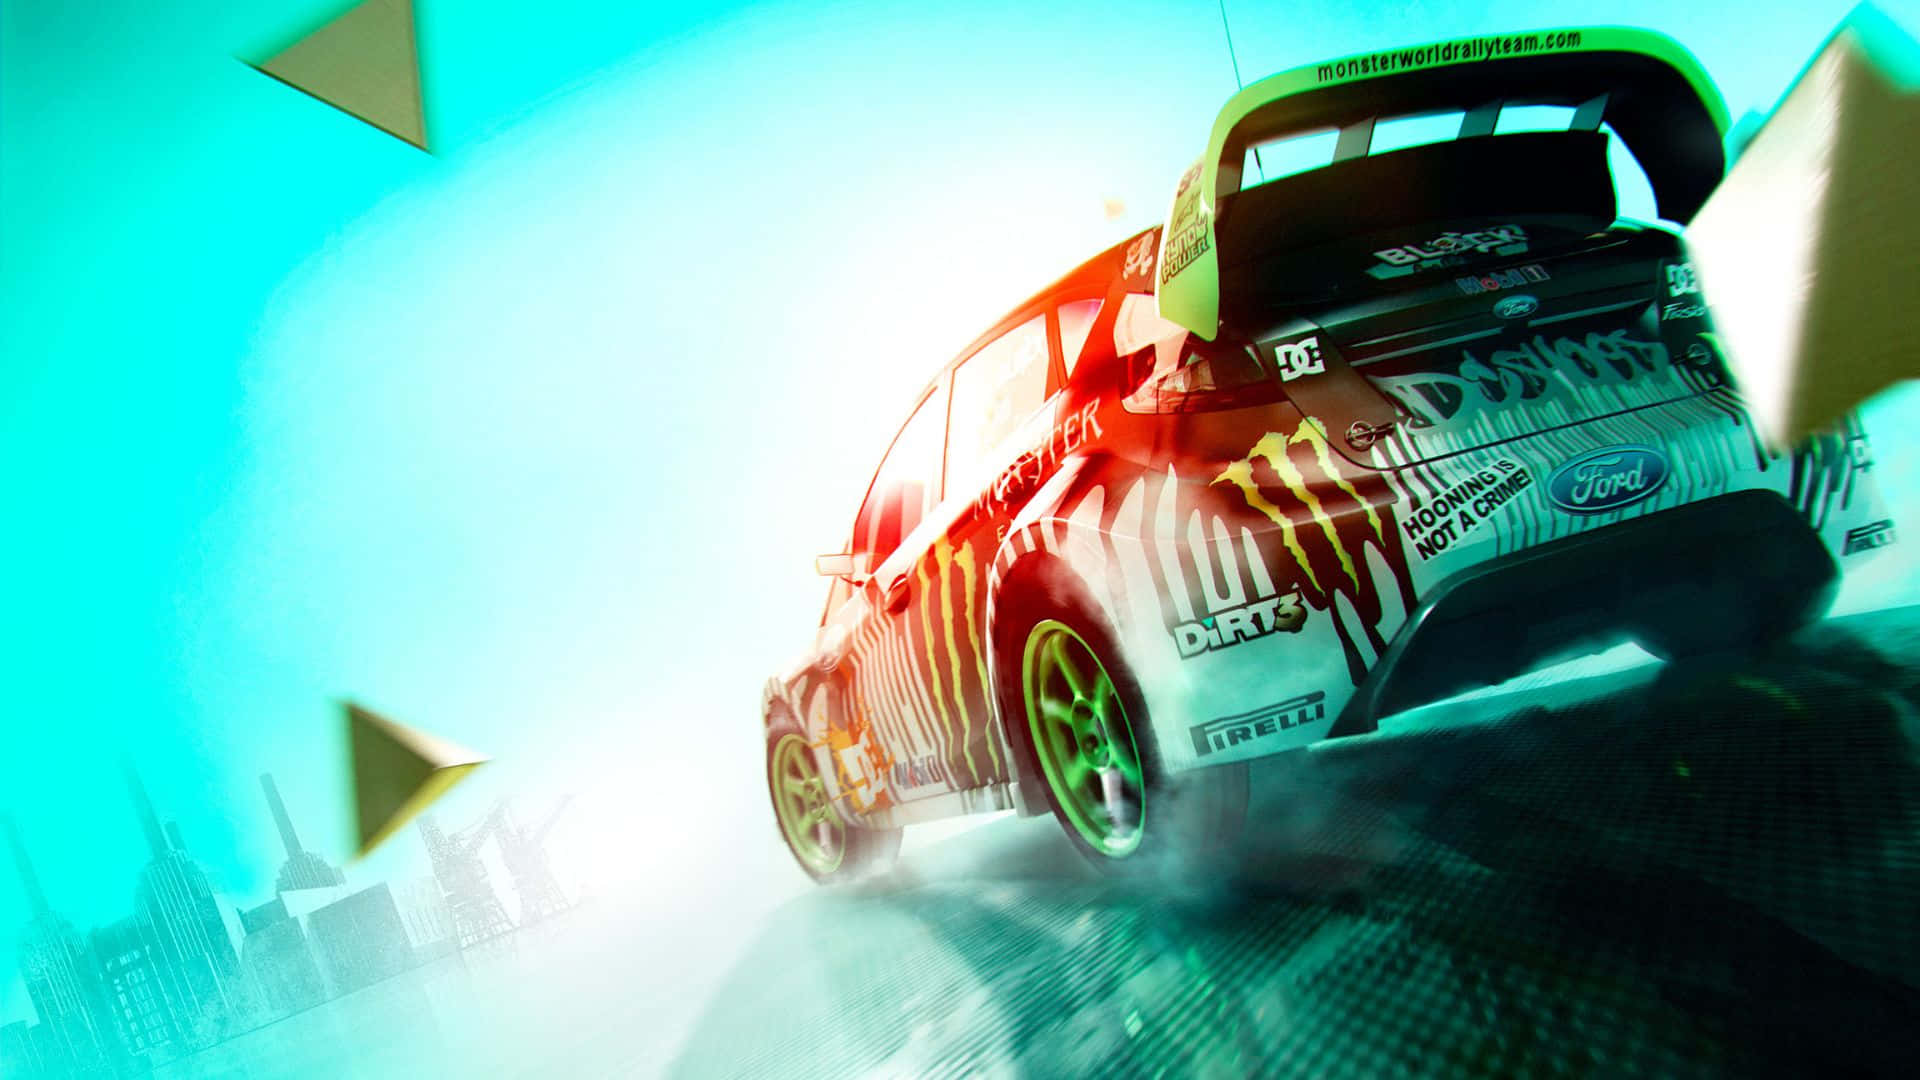 Take a thrilling ride on the 1080p Dirt 3 track.